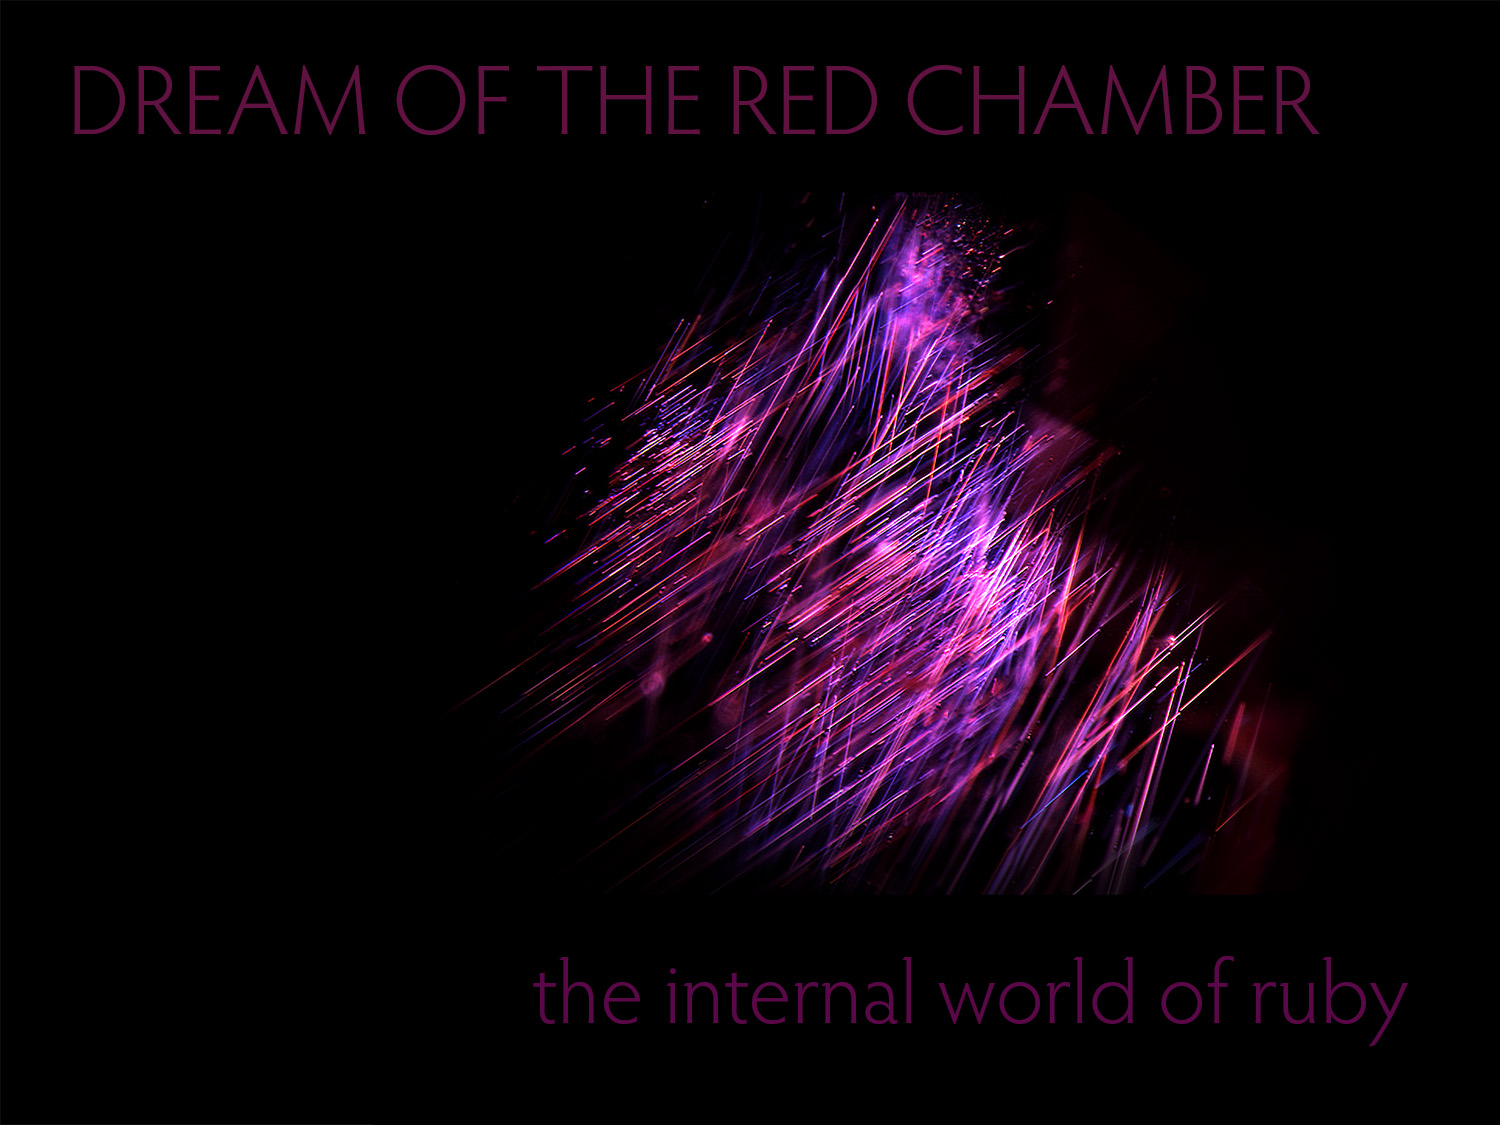 Dream of the Red Chamber: The Internal World of Ruby